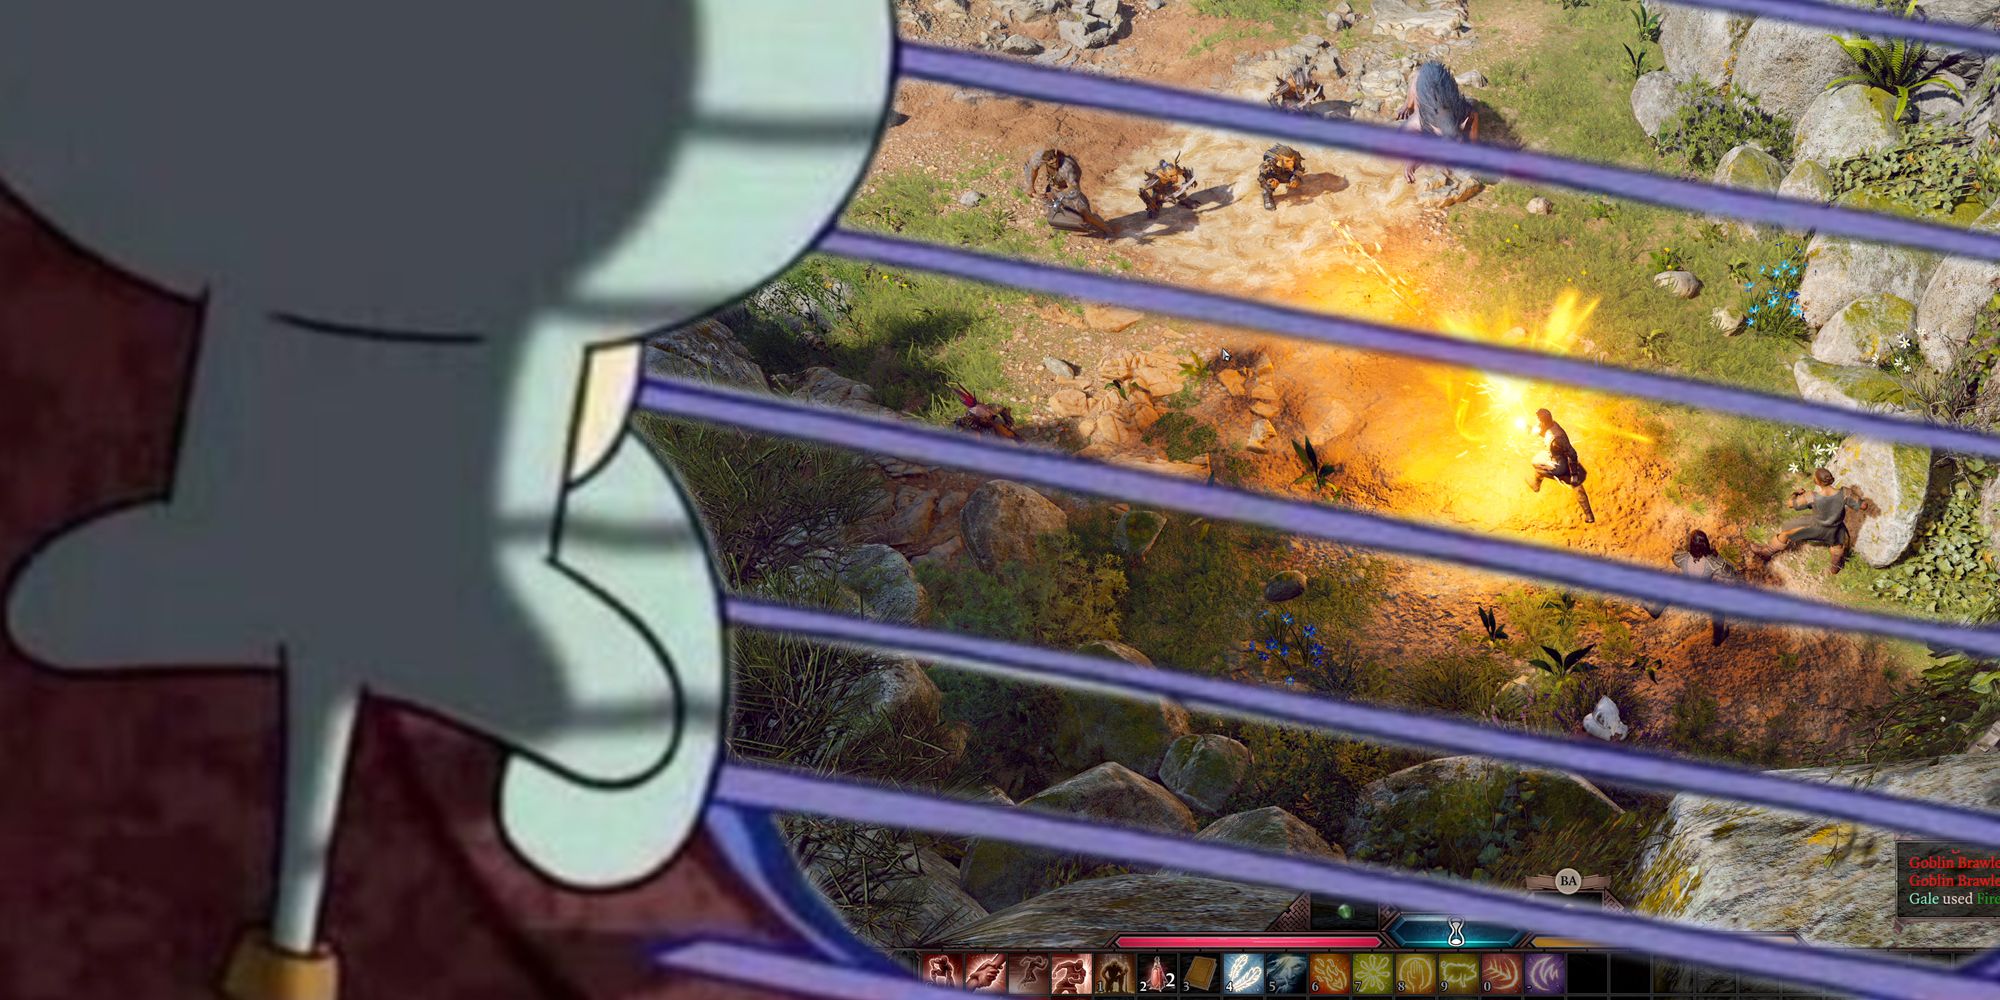 squidward looking out the window at baldur's gate 3